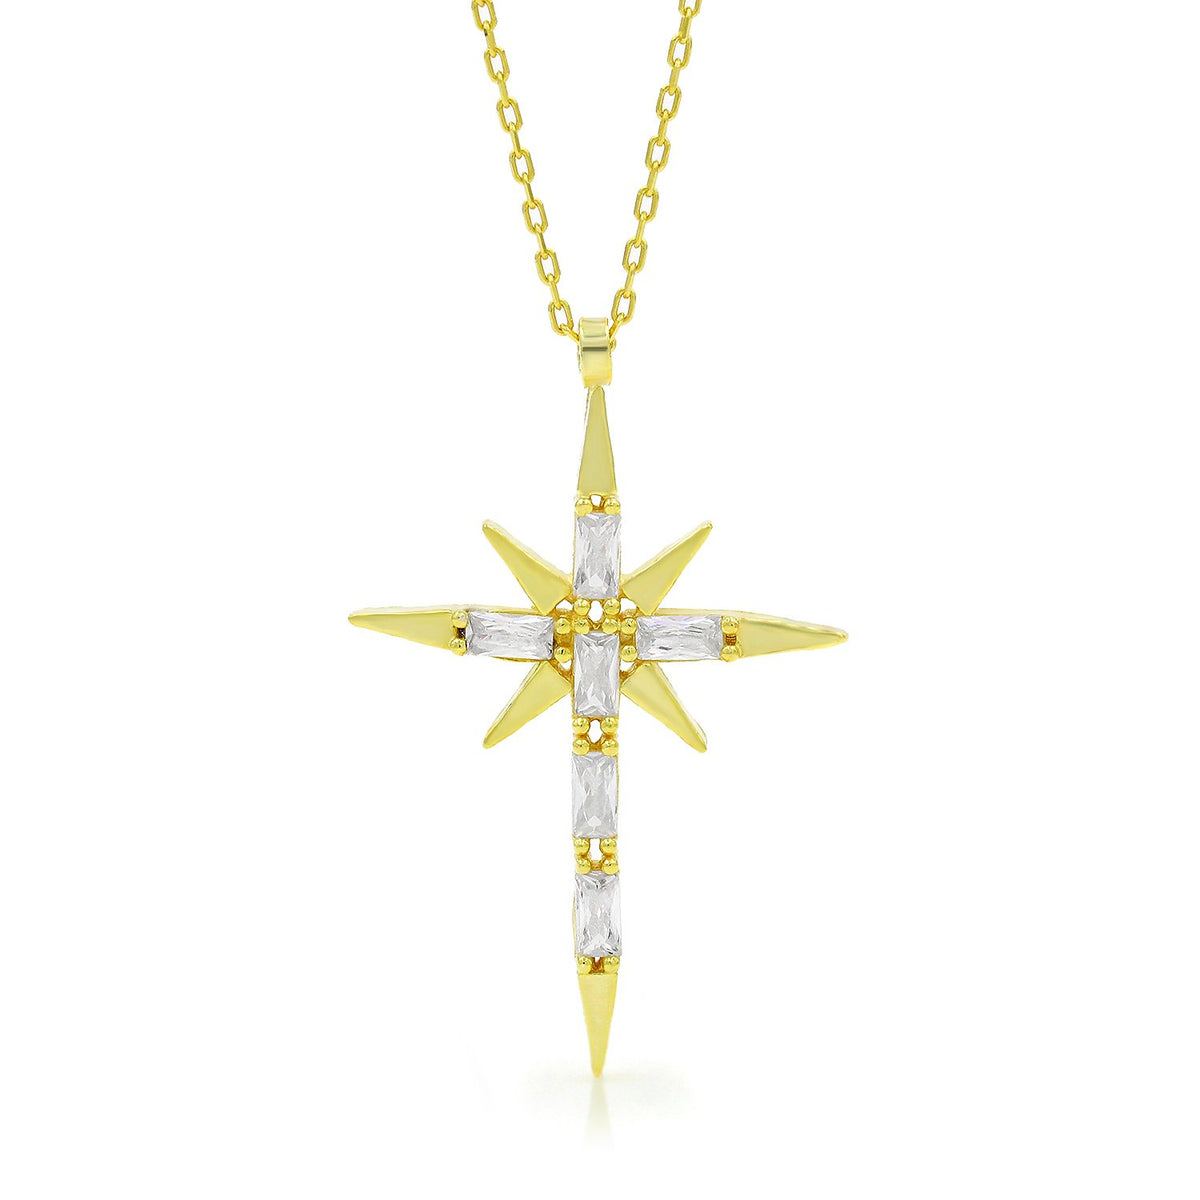 925 Sterling Silver Gold Plated Shining Cross Pendant Necklace